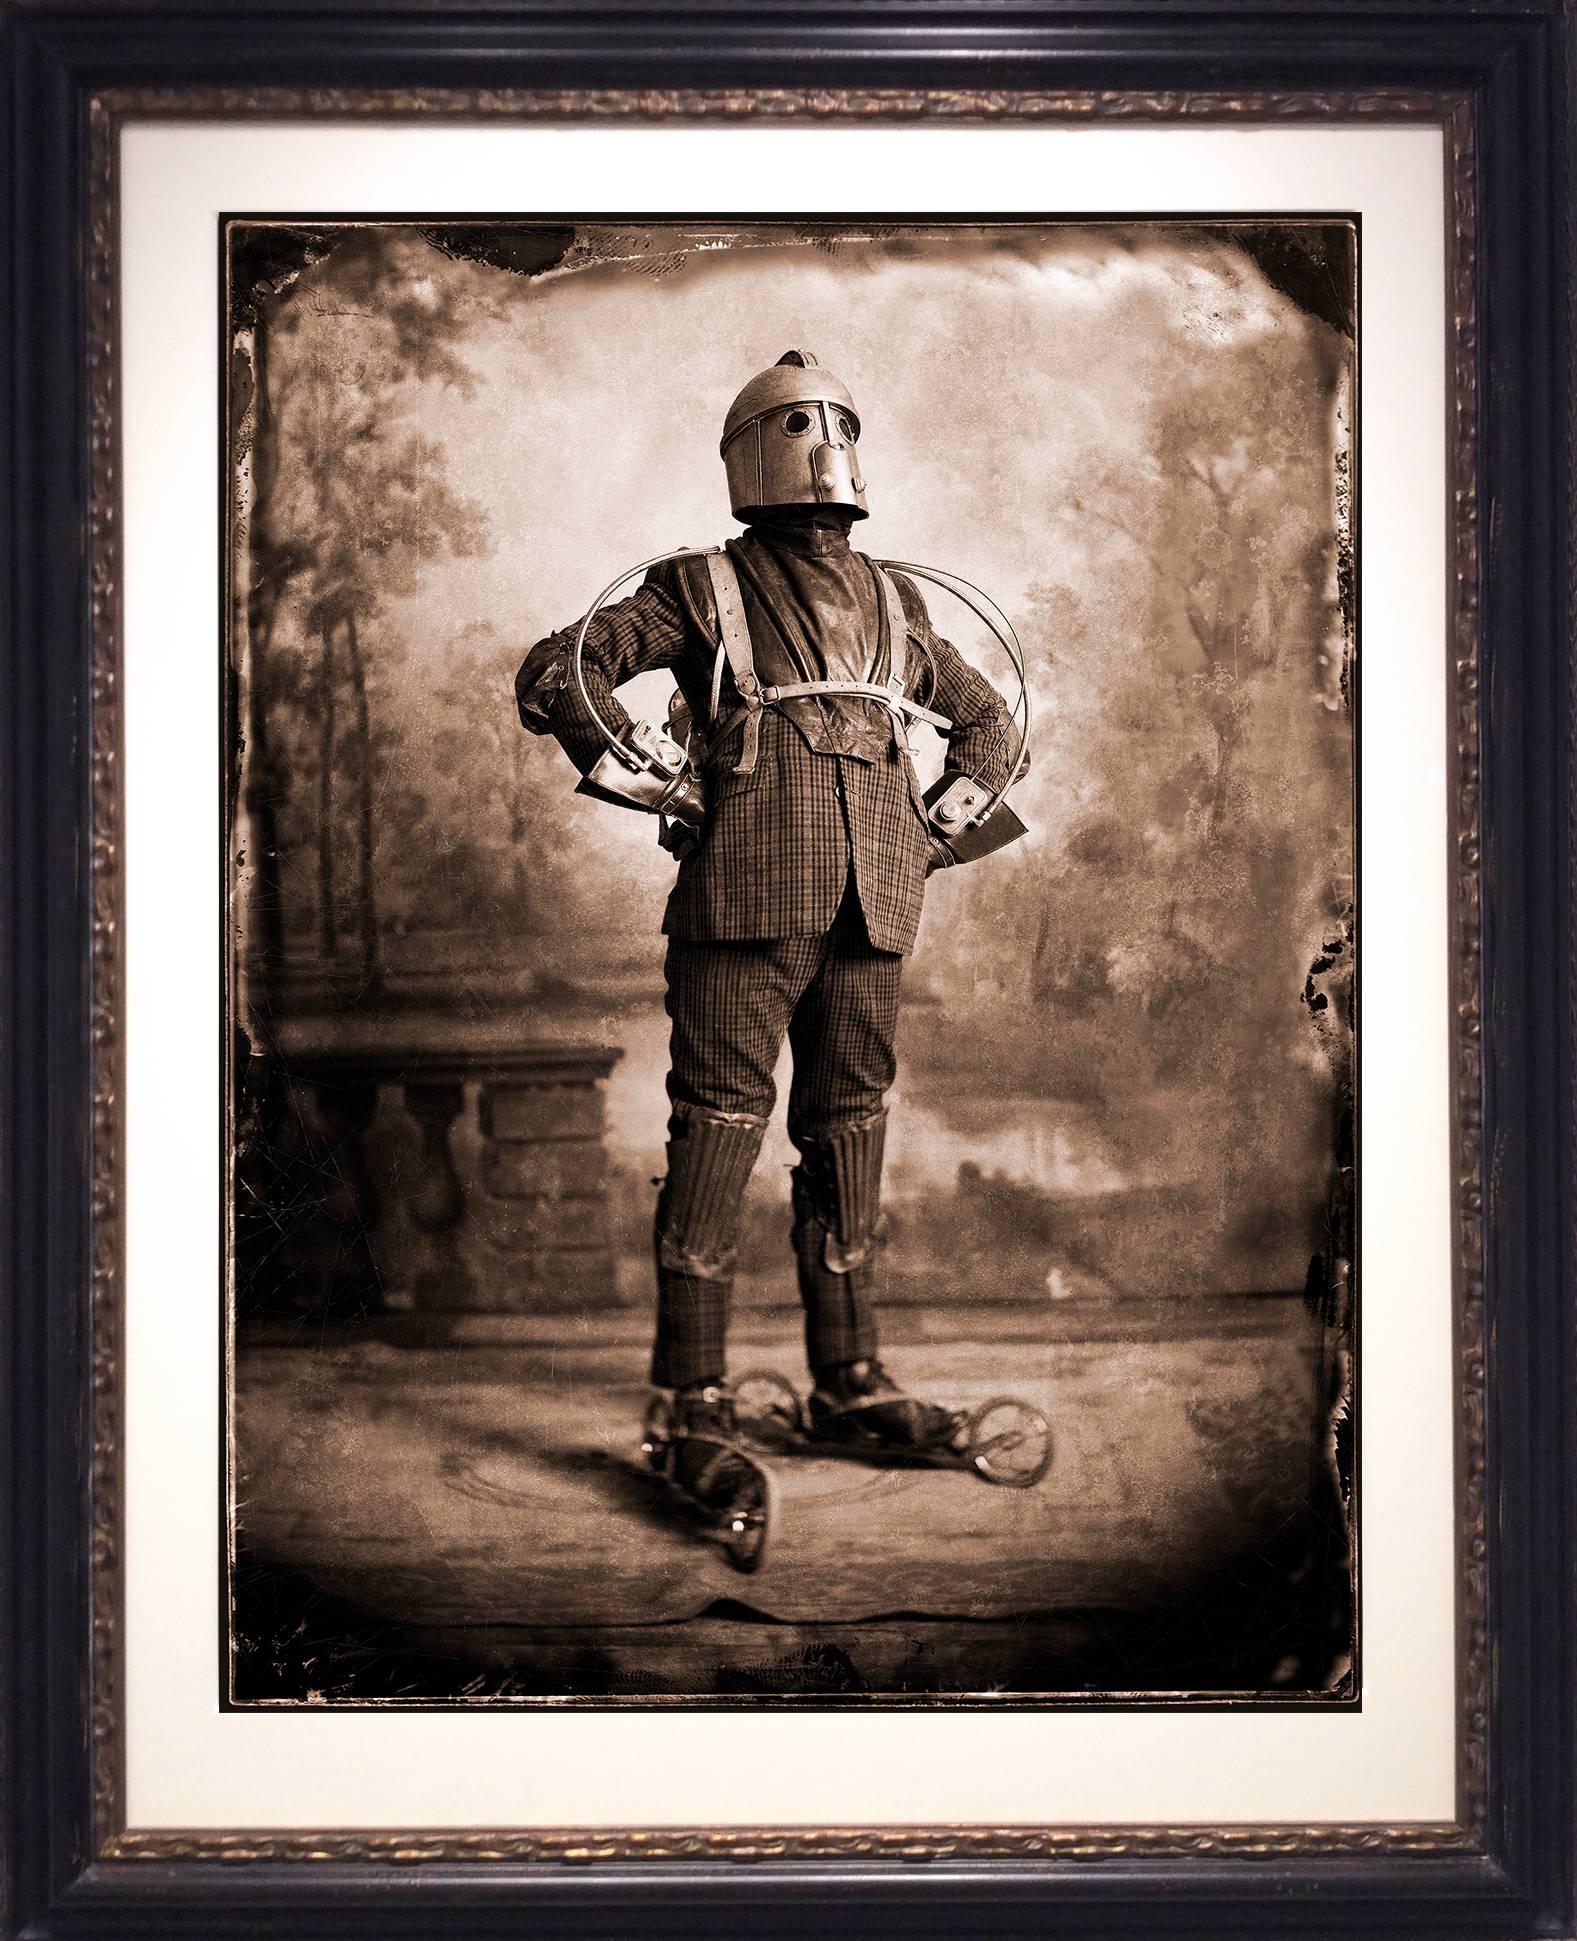 The Perambulator: Surreal, Vintage Style Sepia "Steampunk" Man in Ornate Frame